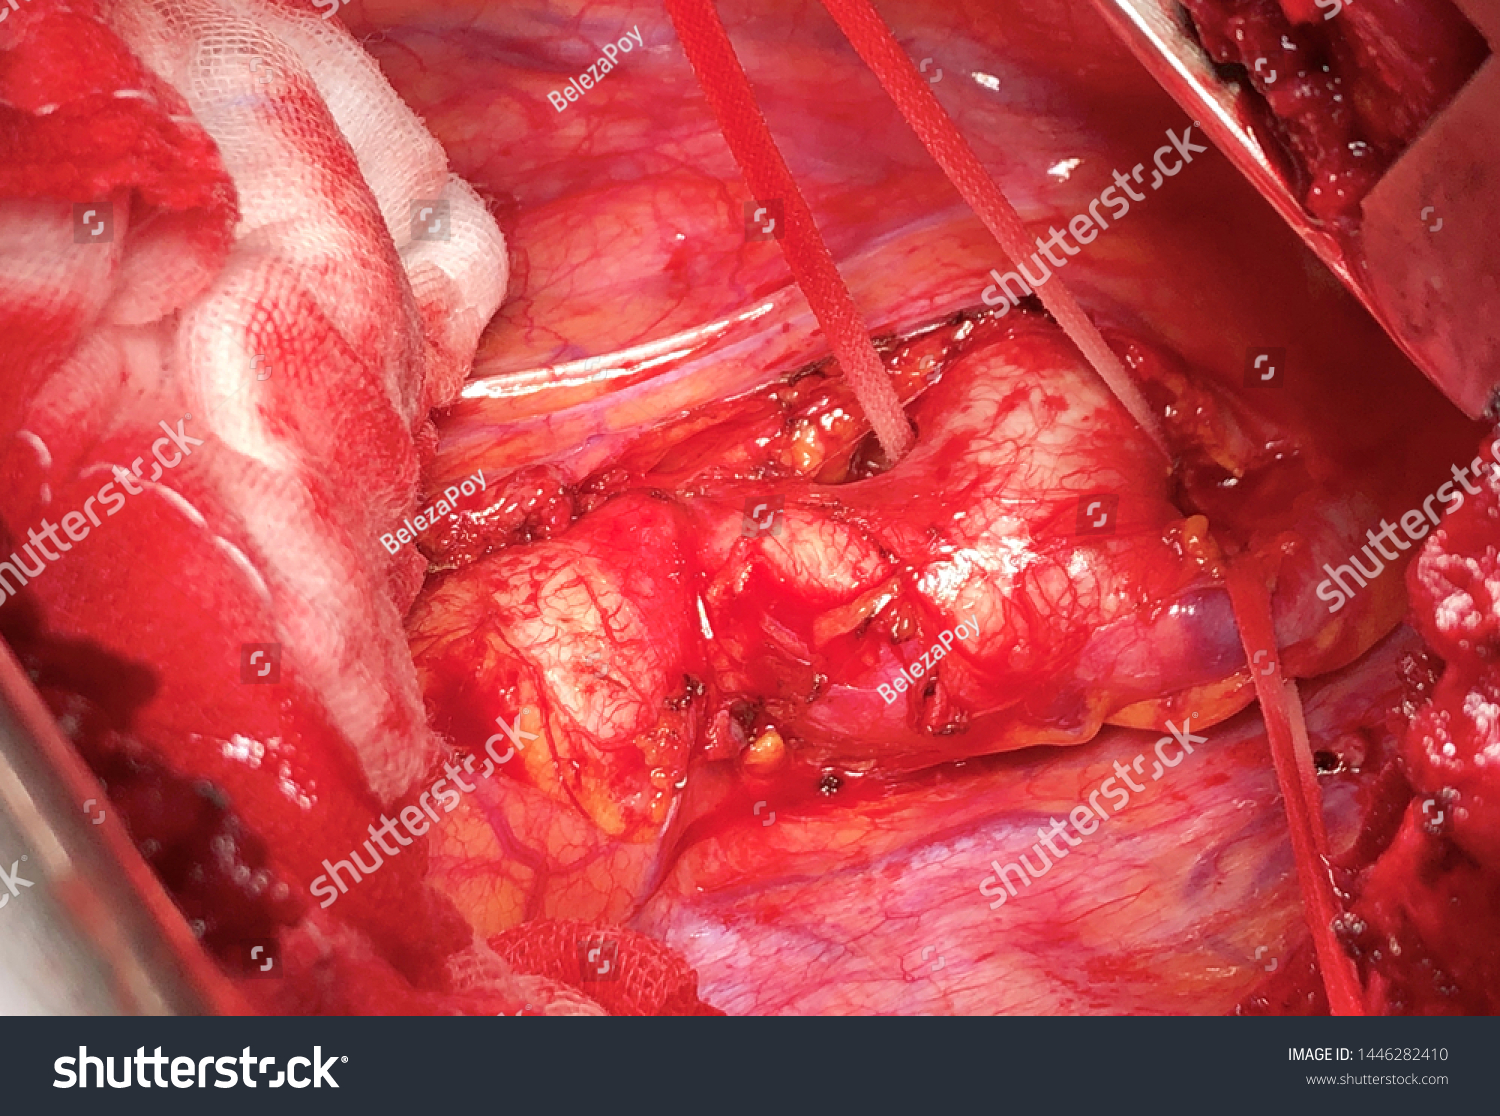 Coarctation of the aorta in adult (CoA or CoAo), also called aortic narrowing, is a congenital heart disease #1446282410